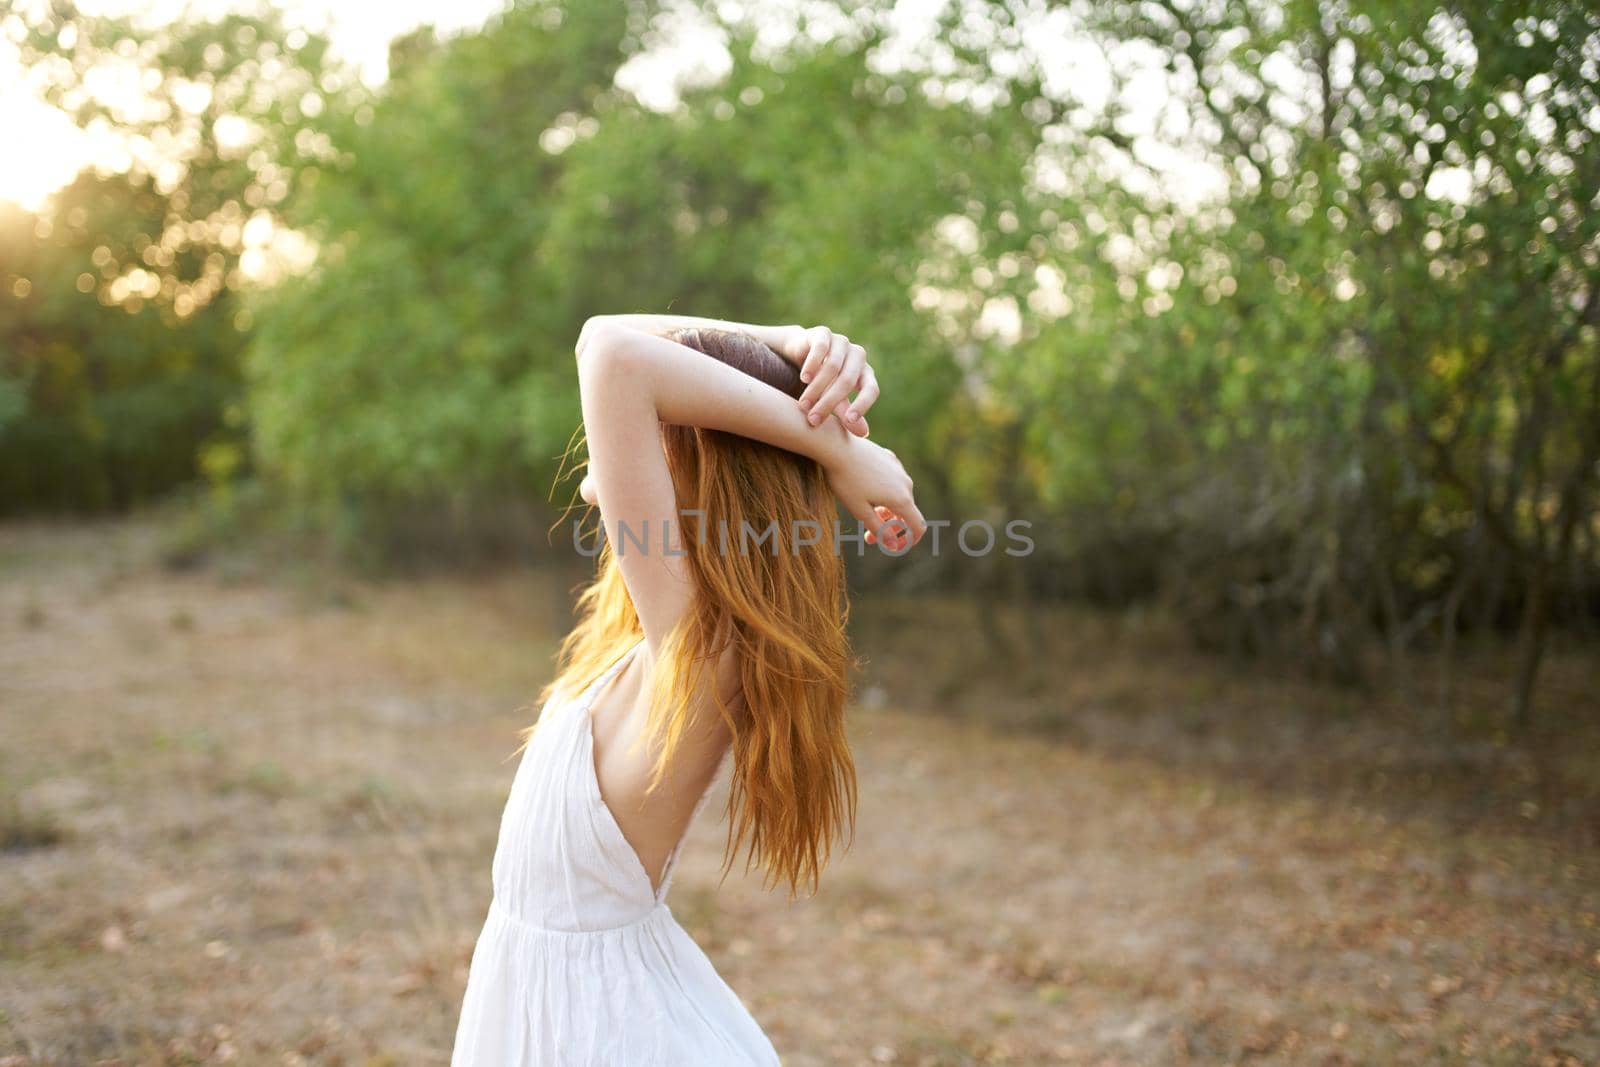 Woman in white dress nature trees vacation lifestyle. High quality photo